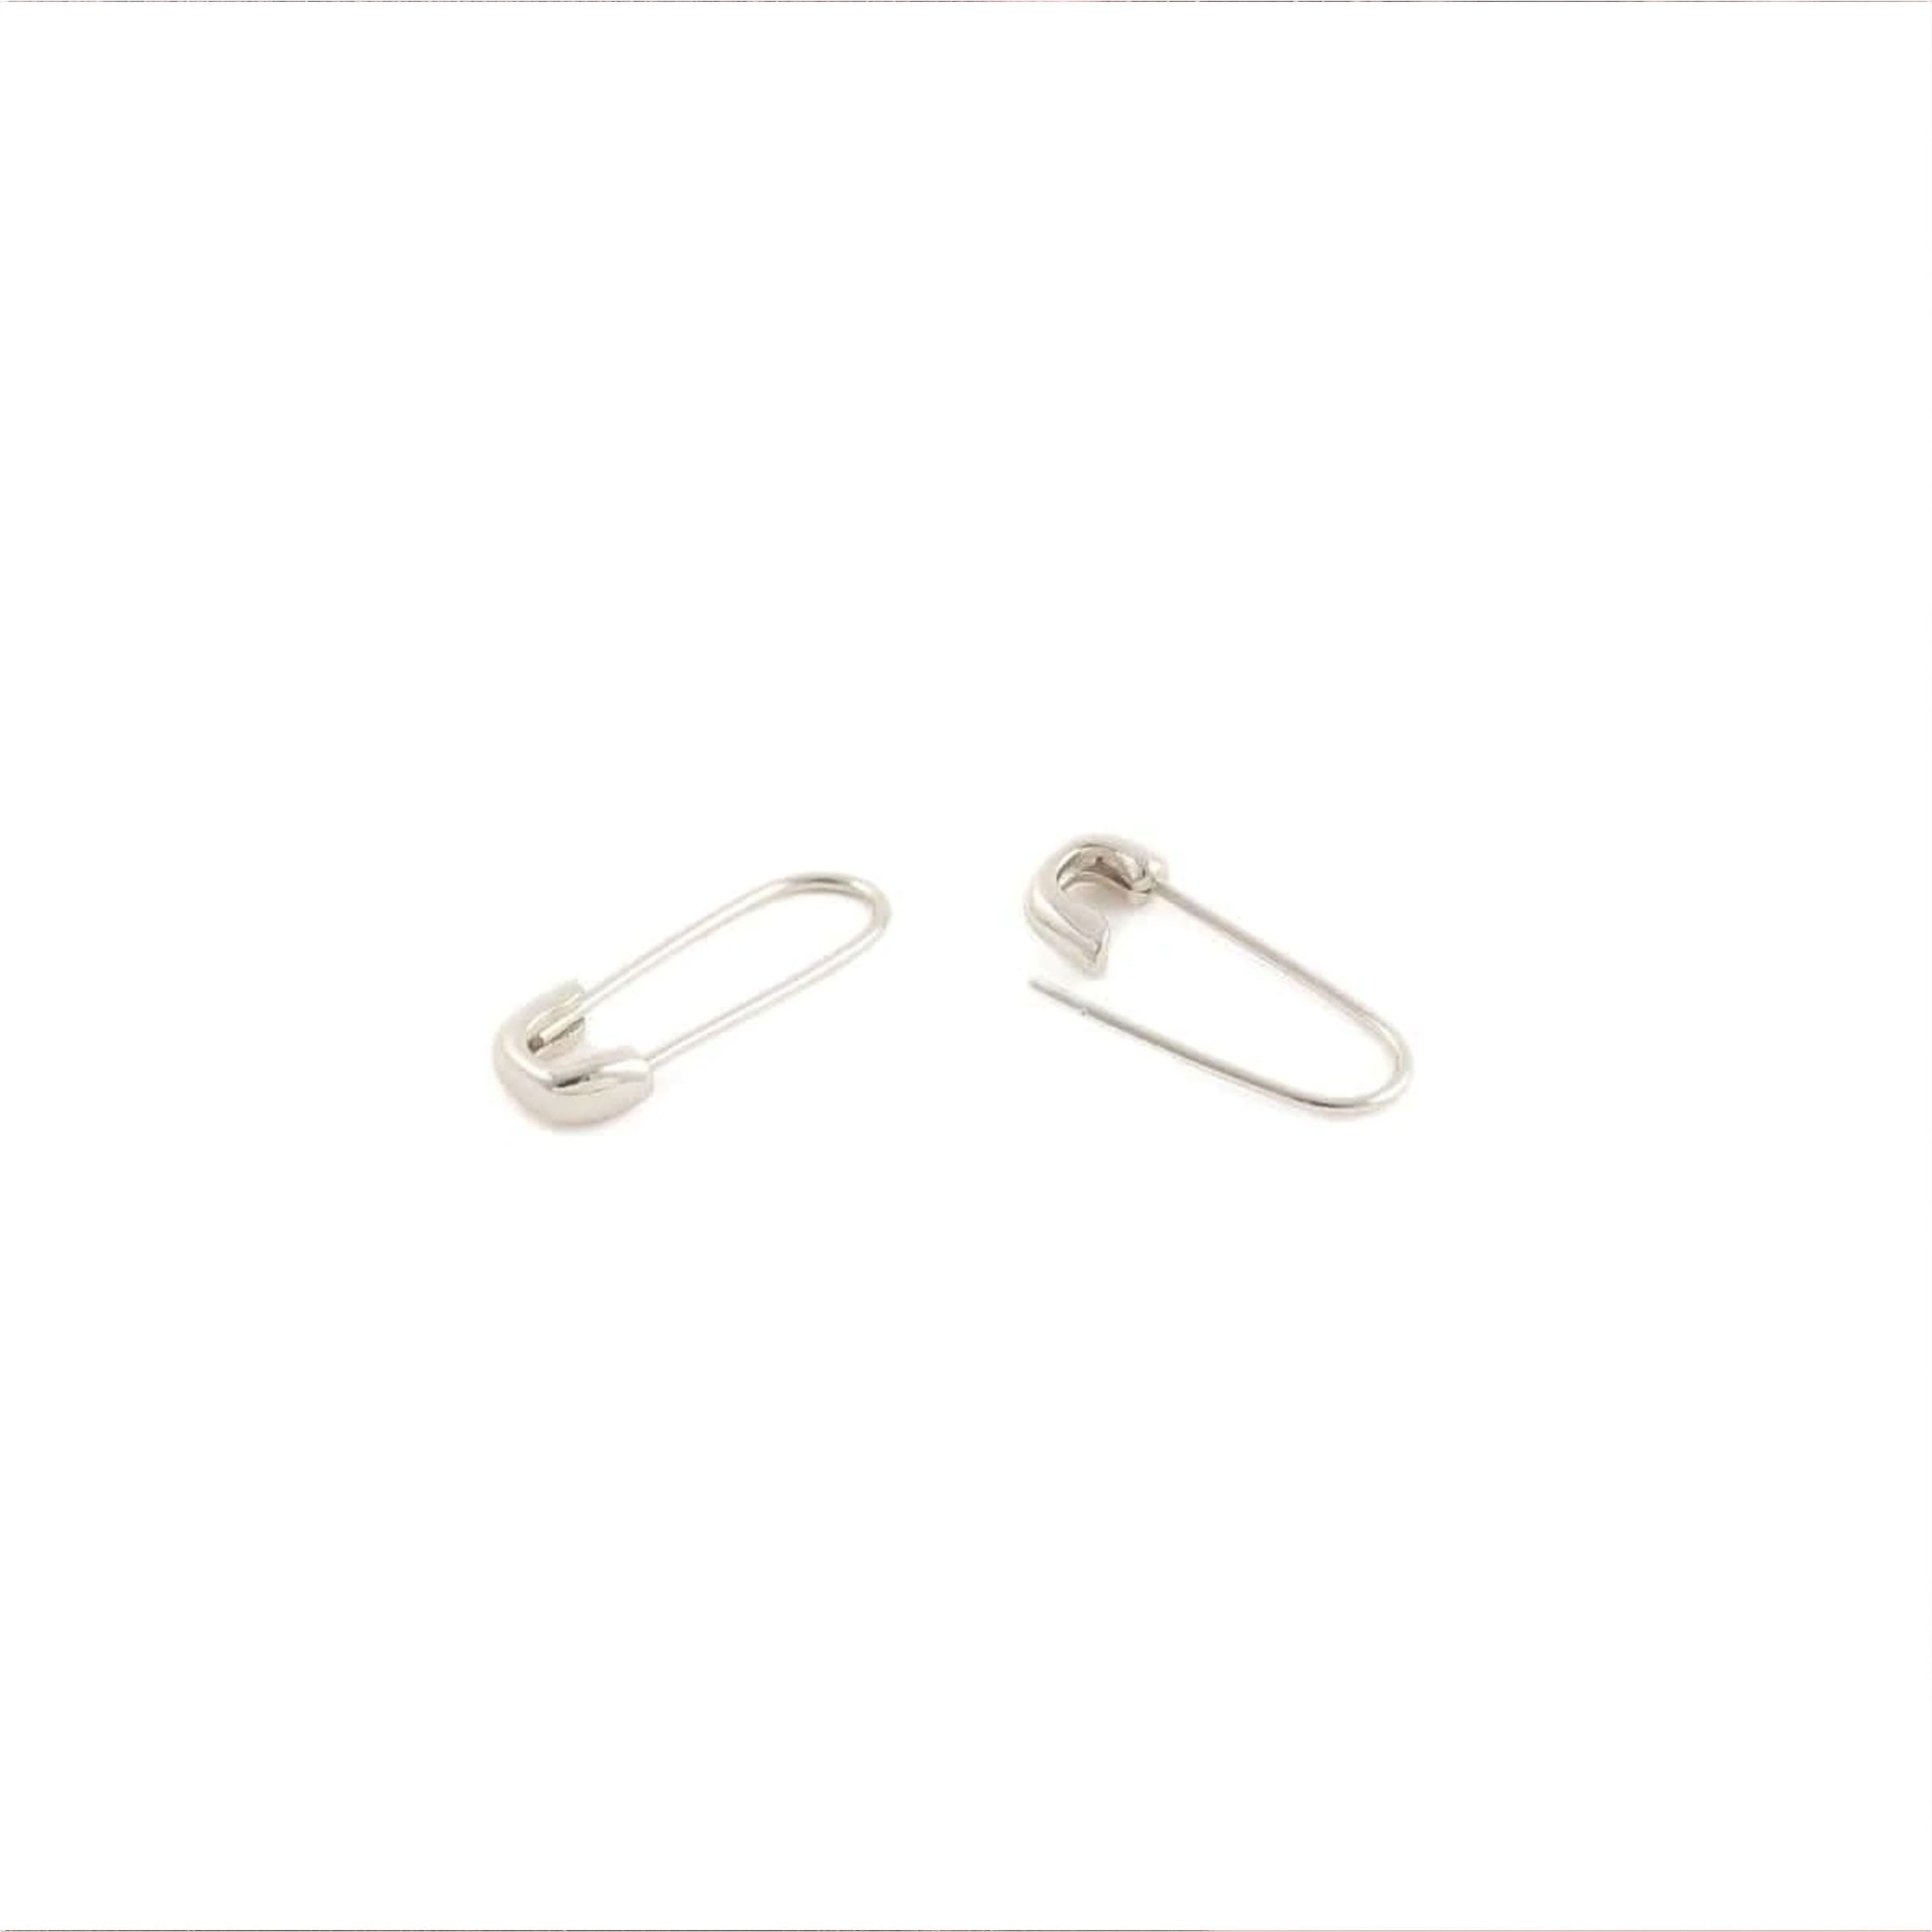 Yasmine New York Safety Pin Earrings in Natural | Lyst